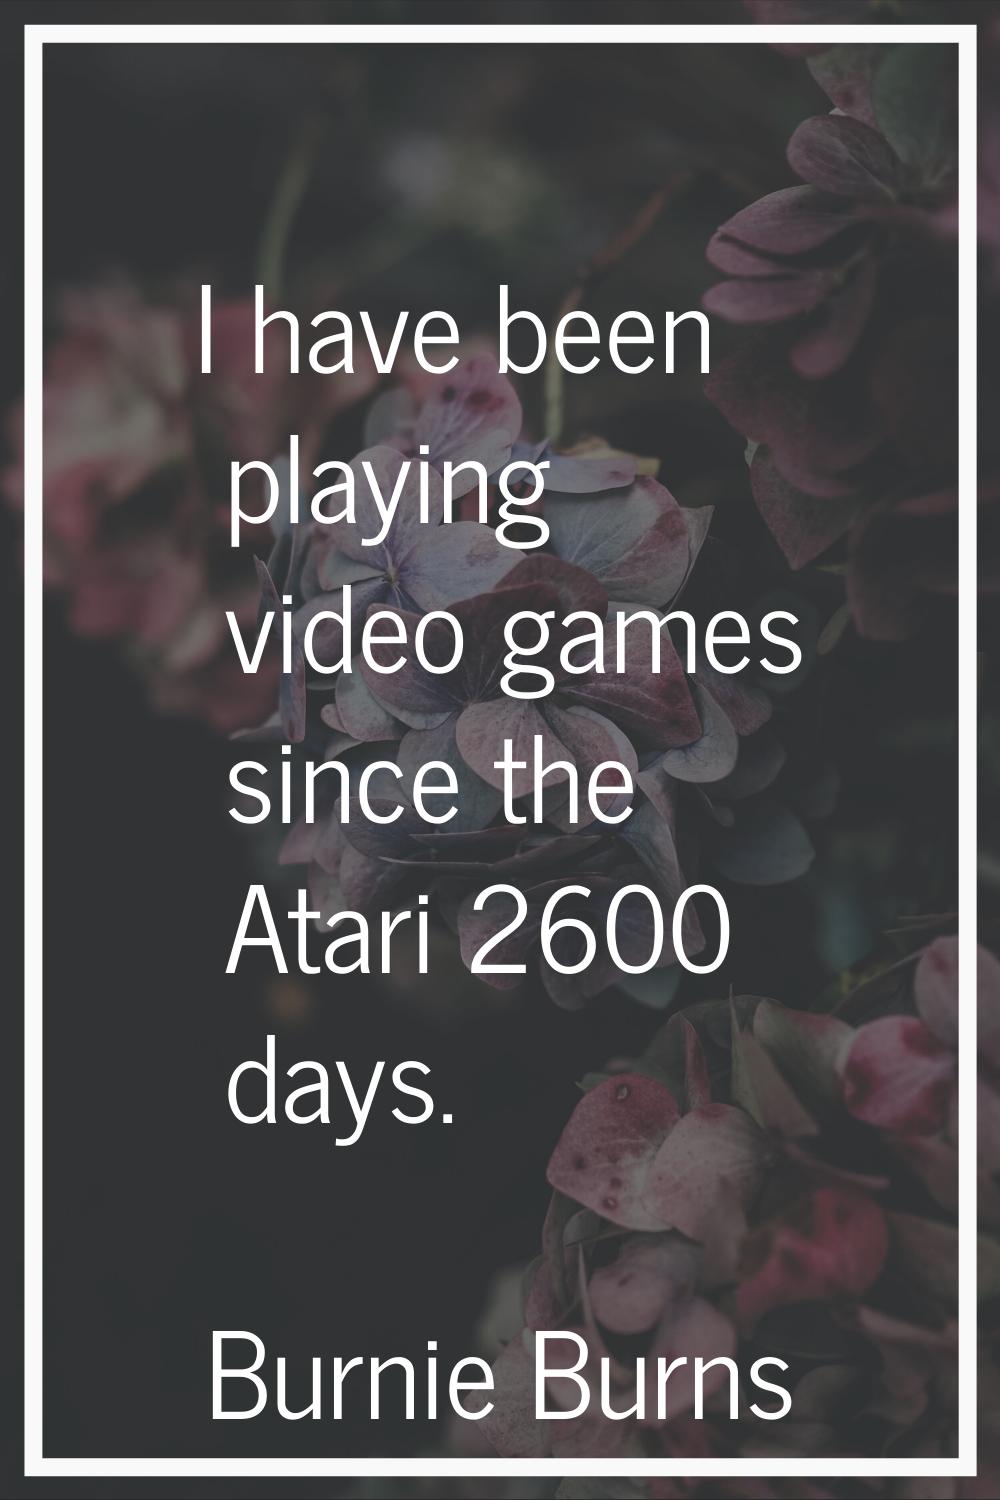 I have been playing video games since the Atari 2600 days.